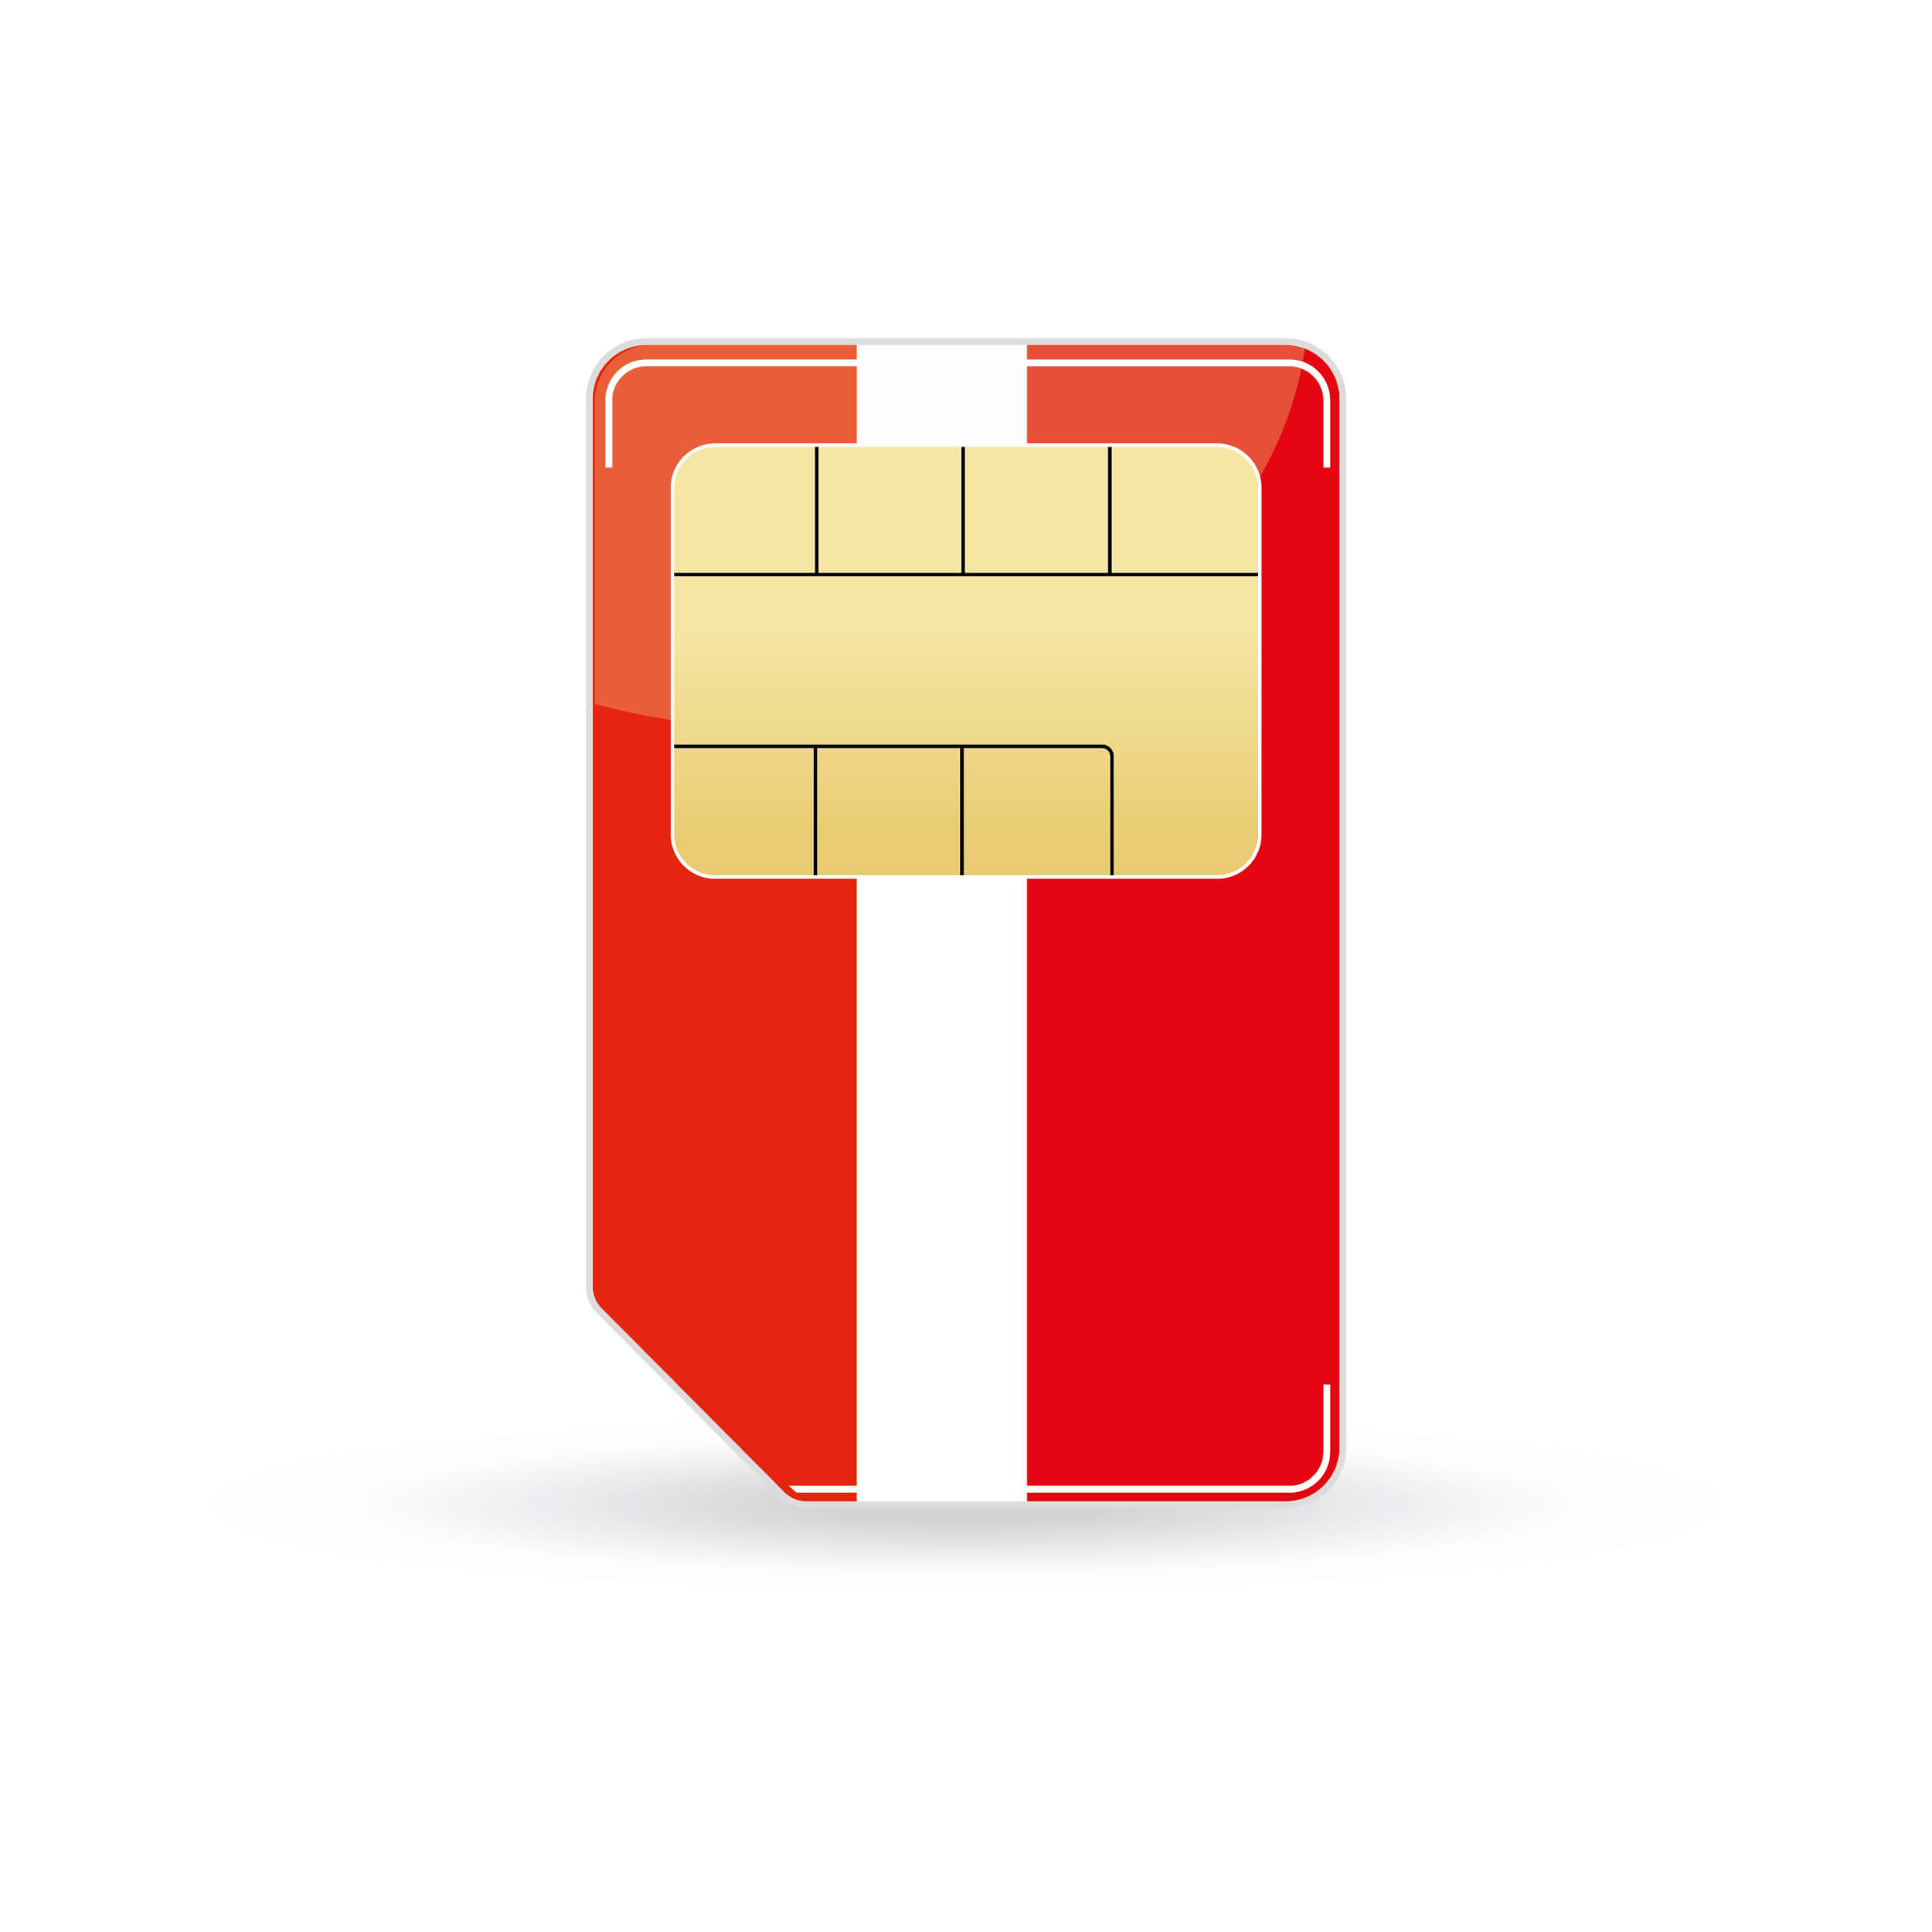 LATVIA PREPAID INTERNET GSM  SIM Card NEW Unactivated and un-punched OKARTE 